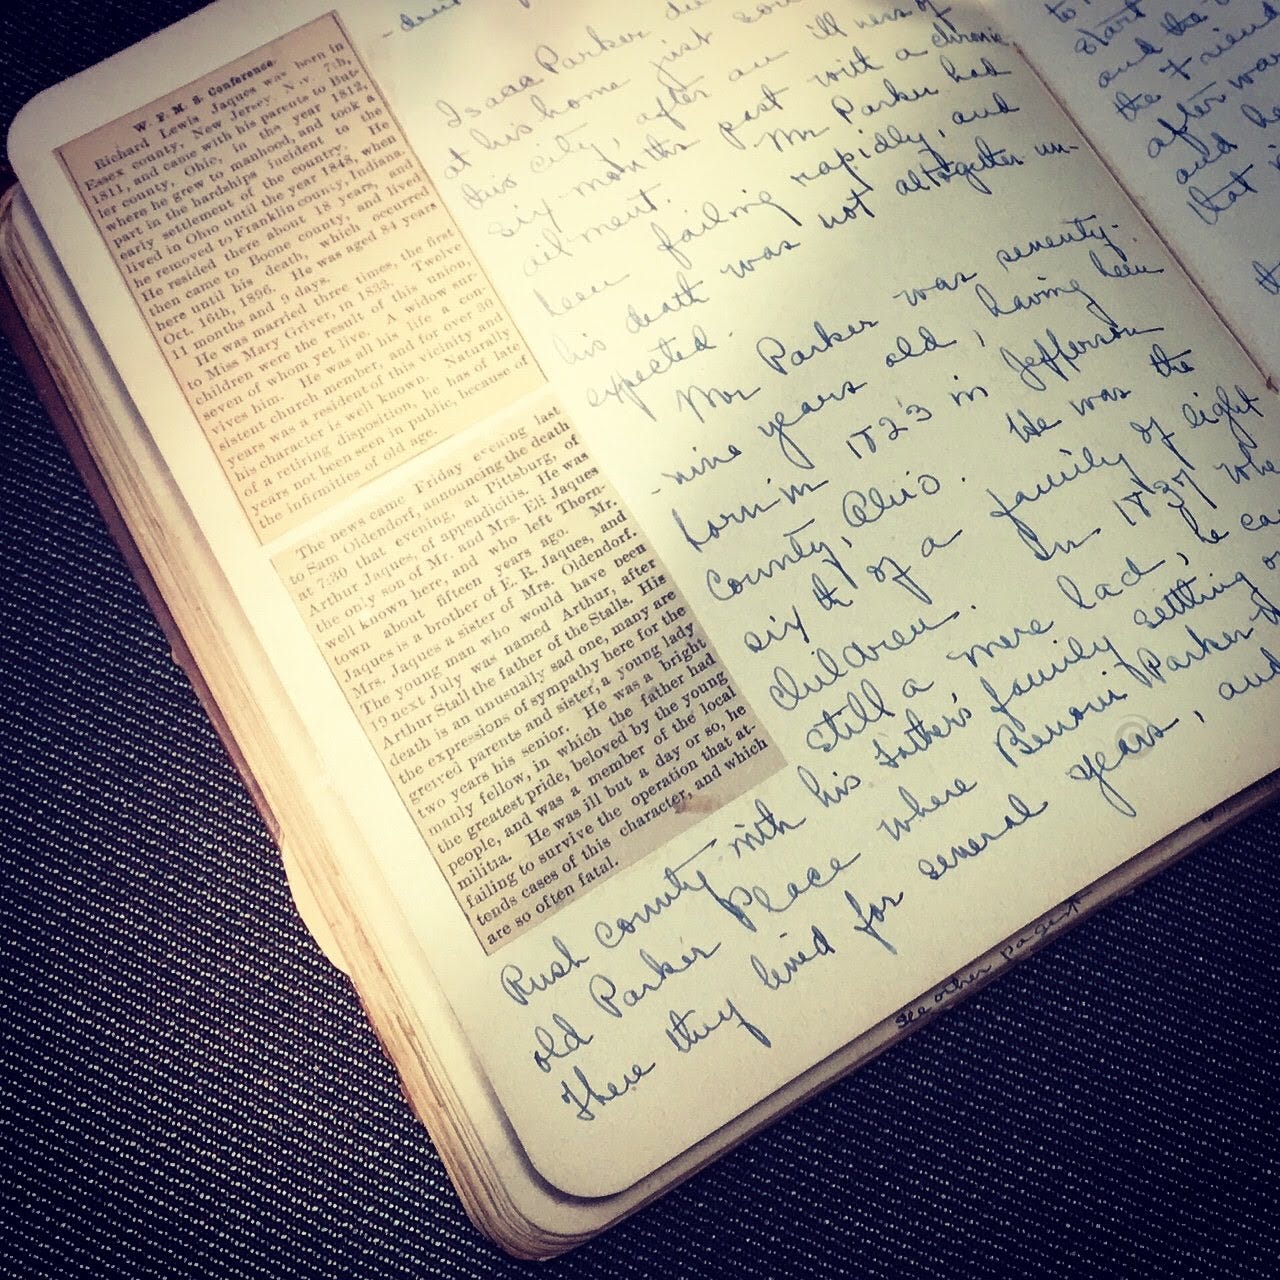 A handmade scrapbook from the early 20th century with newspaperclippings, photograph and handwriting.